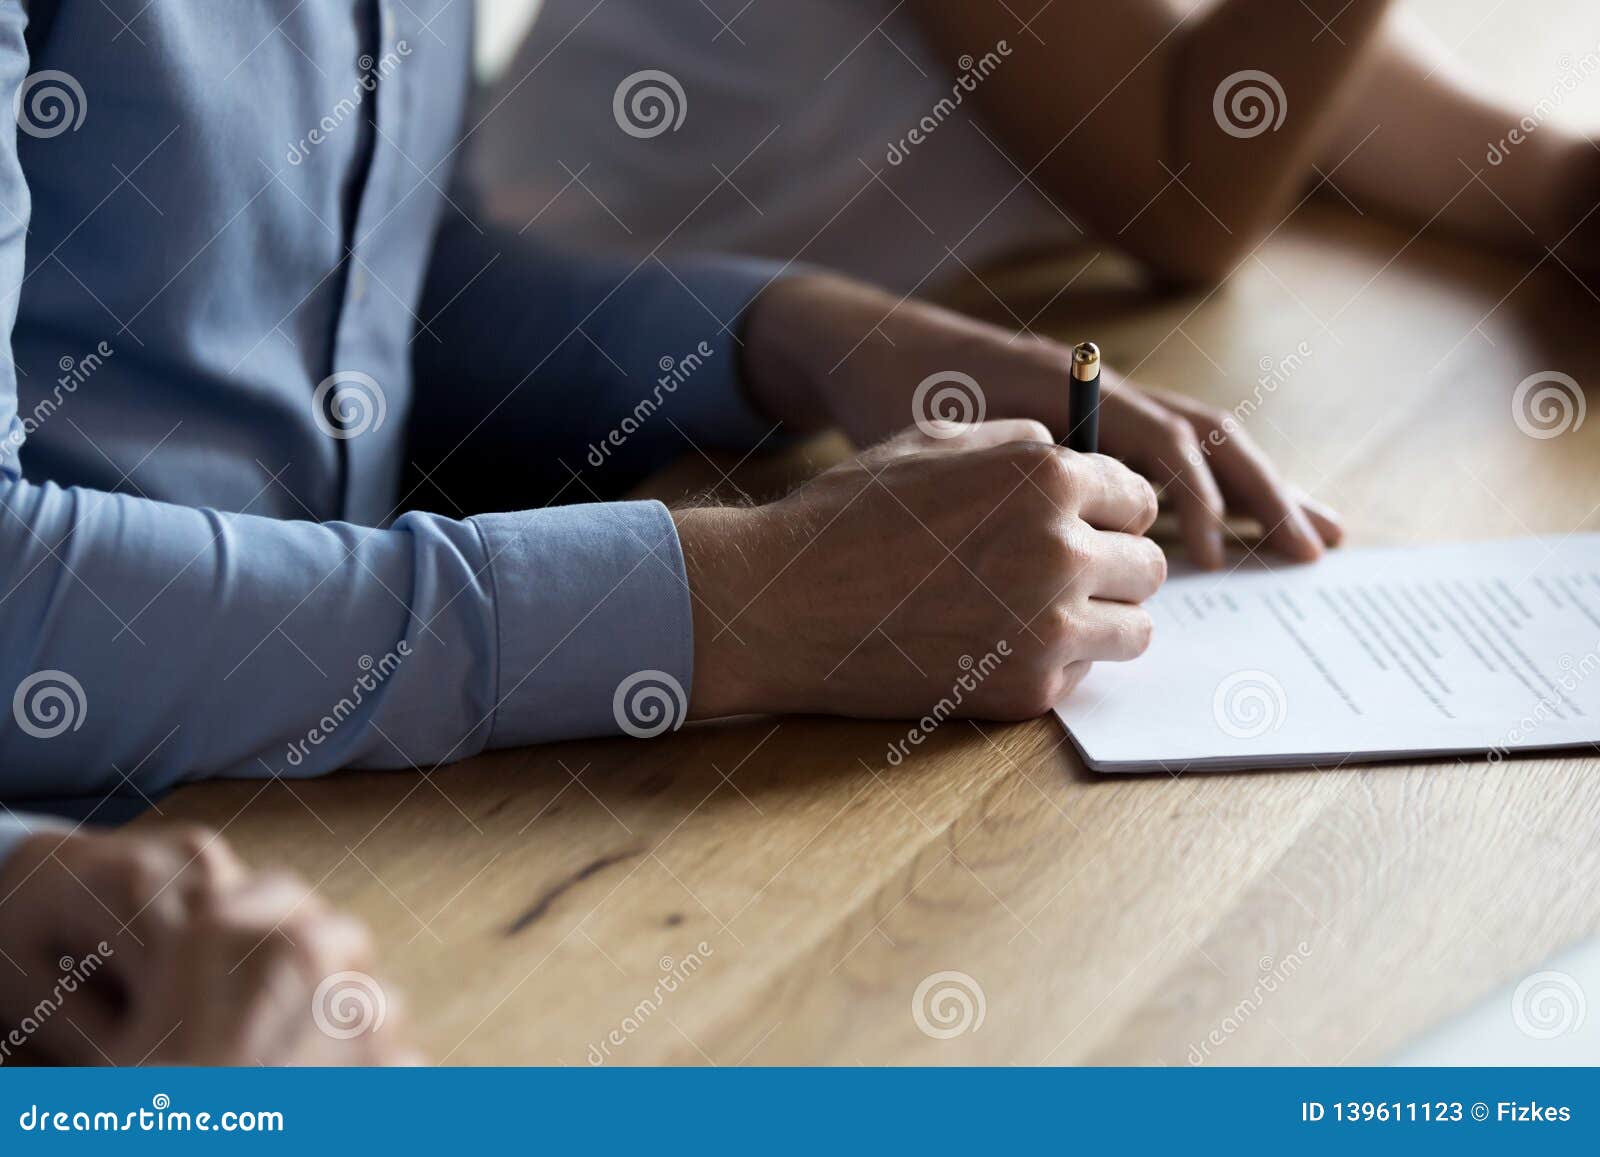 close up male hand holding pen and signing legal document